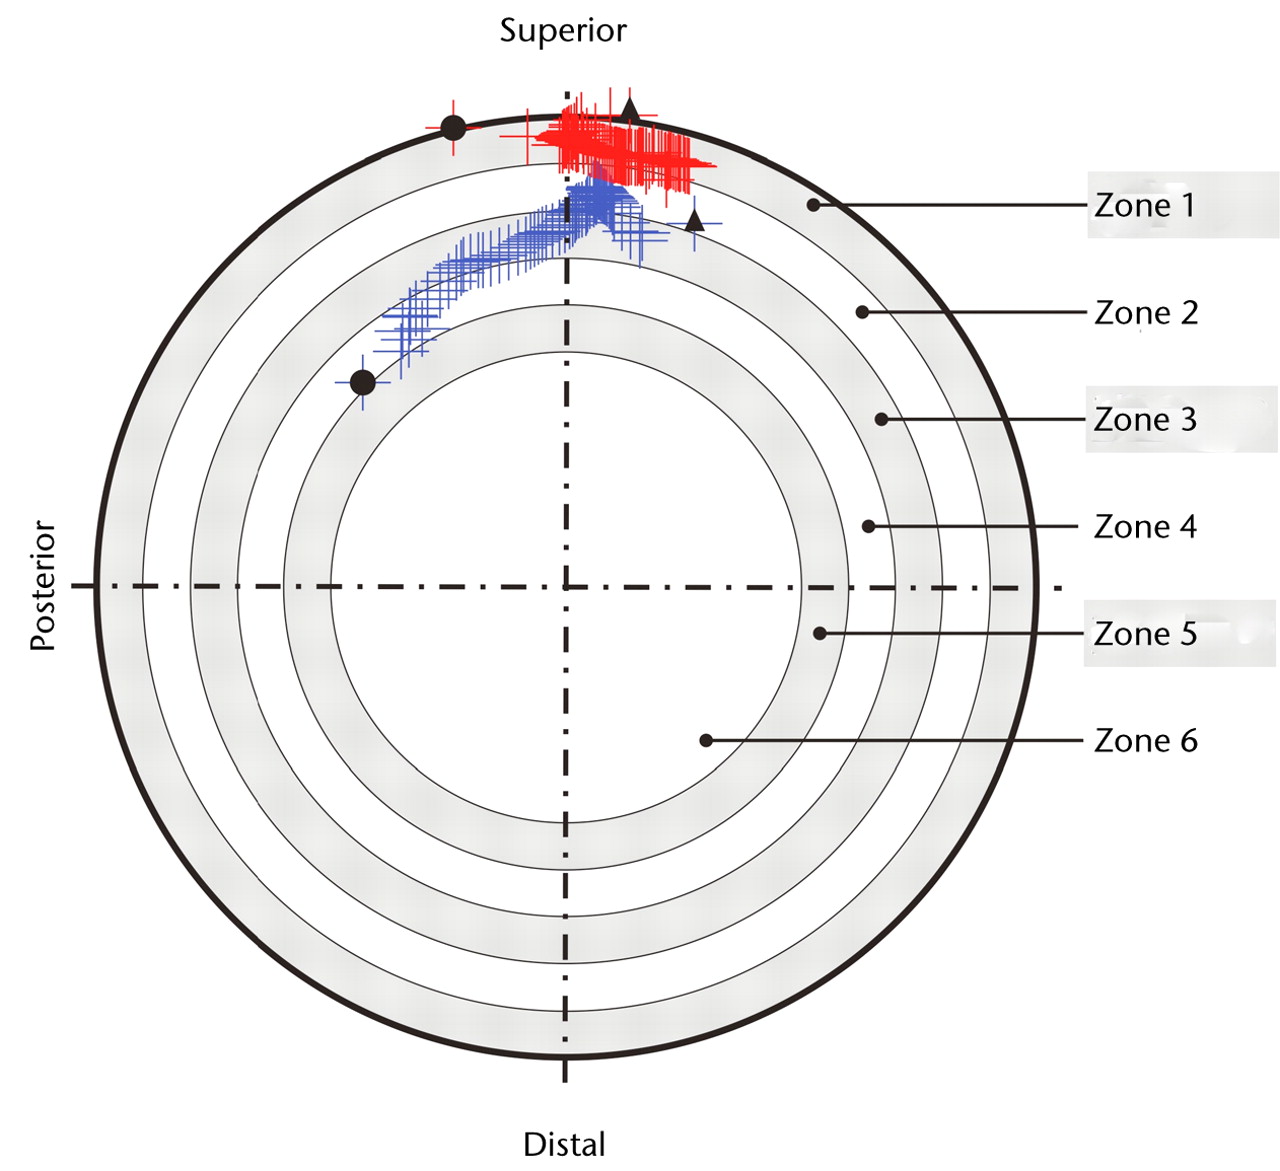 Fig. 2 
            Diagram showing force paths projected
on the acetabular component viewed in the direction through the
centre of the component. The inner bearing surface was divided into
concentric zones defined in 10% increments of the component face
radius, with the zone at the edge designated as zone 1. In hip A
(in blue), the force path does not enter the outer most radial zone
(zone 1), thus no edge-loading is observed. In hip B (in red), during
walking, the force path enters the outer most radial zone (zone 1),
indicating edge-loading. The black circles (●) indicate force path
at heelstrike and the black triangles (p) indicate force path locus
at toe-off.
          